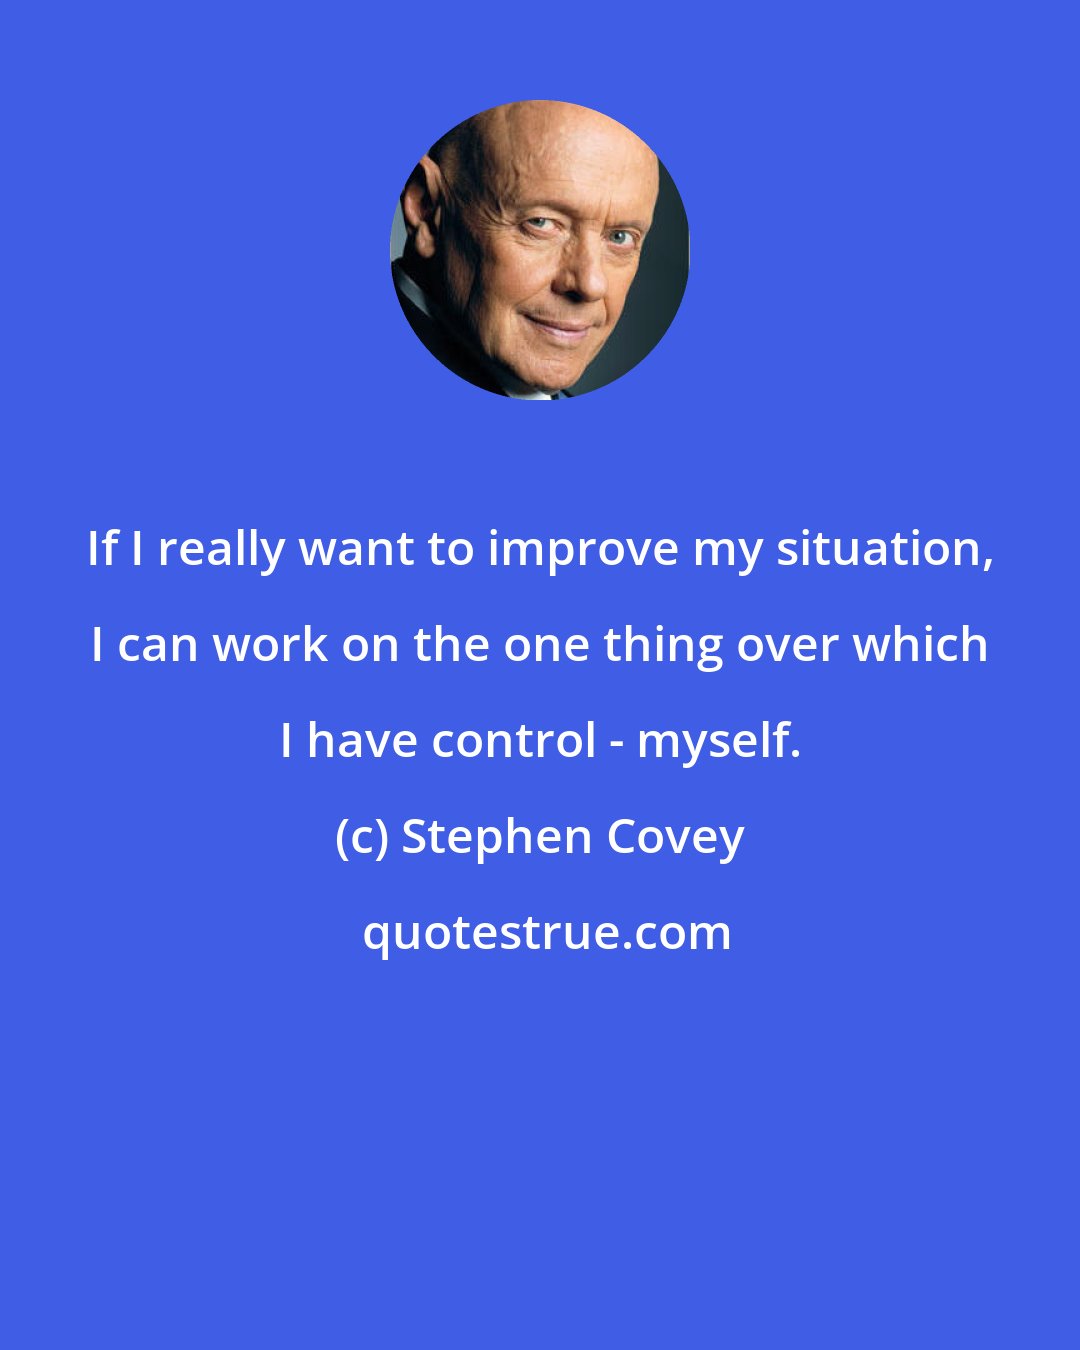 Stephen Covey: If I really want to improve my situation, I can work on the one thing over which I have control - myself.